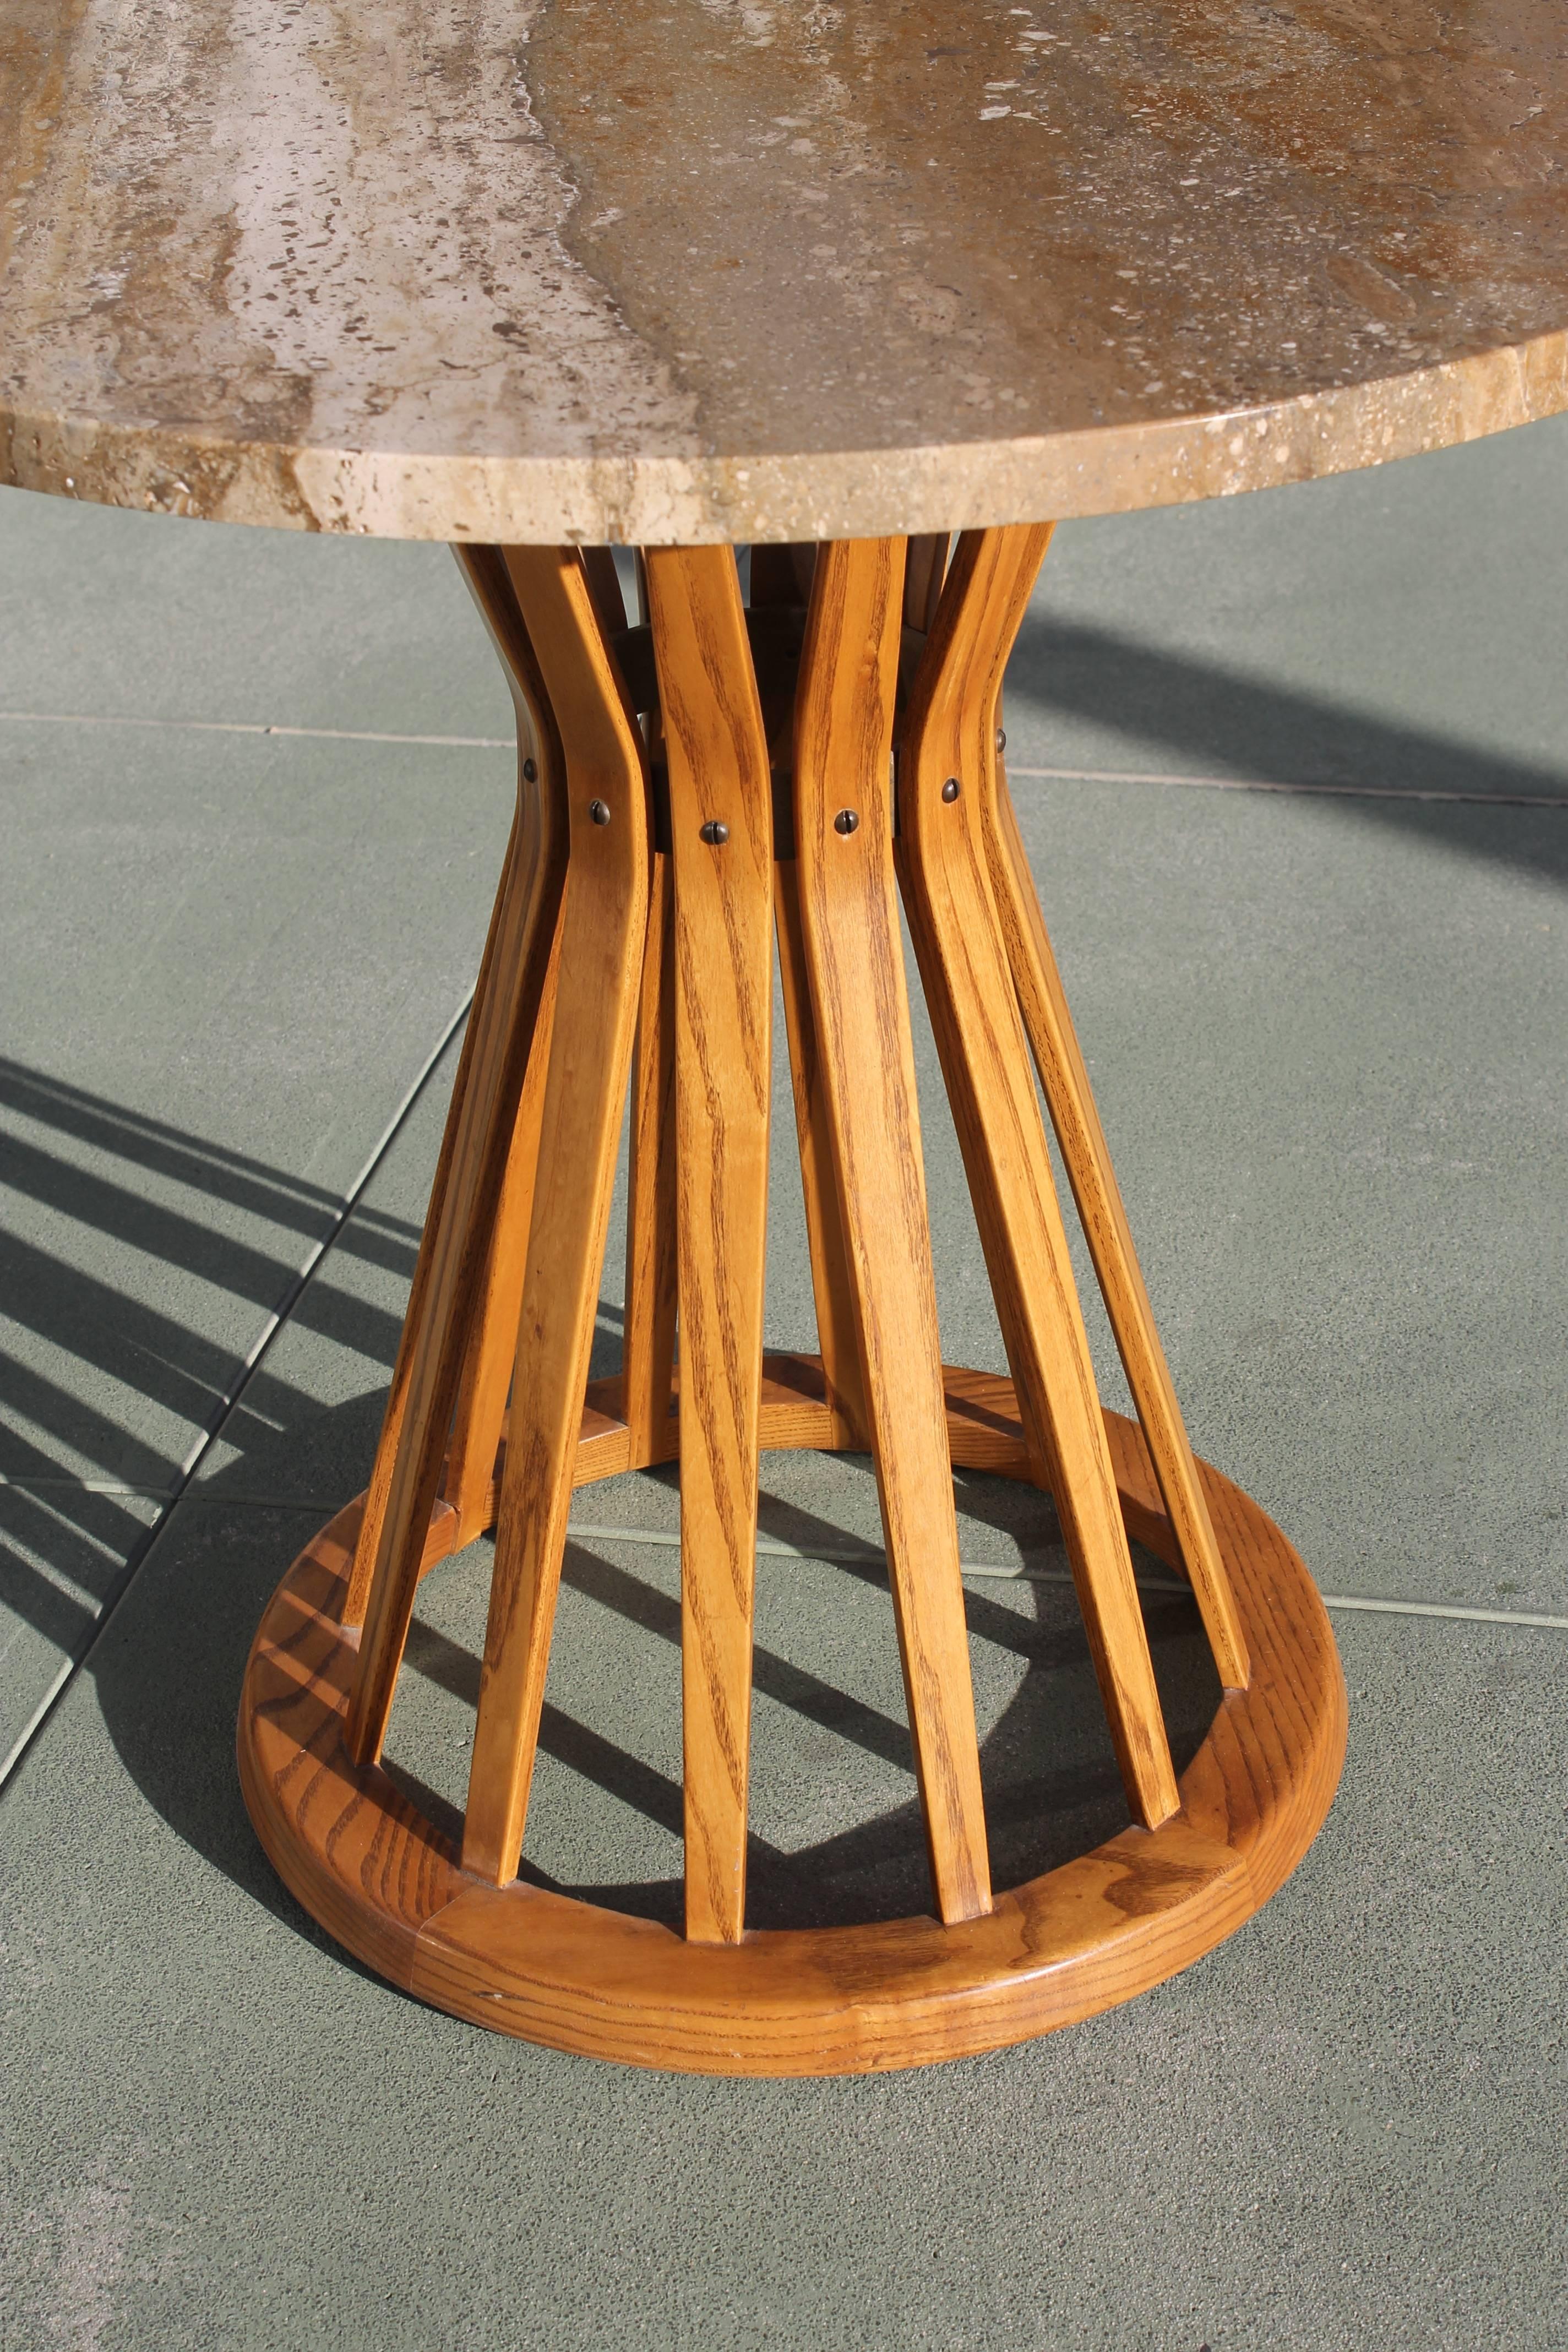 American Large Sheaf of Wheat Table Designed by Edward Wormley